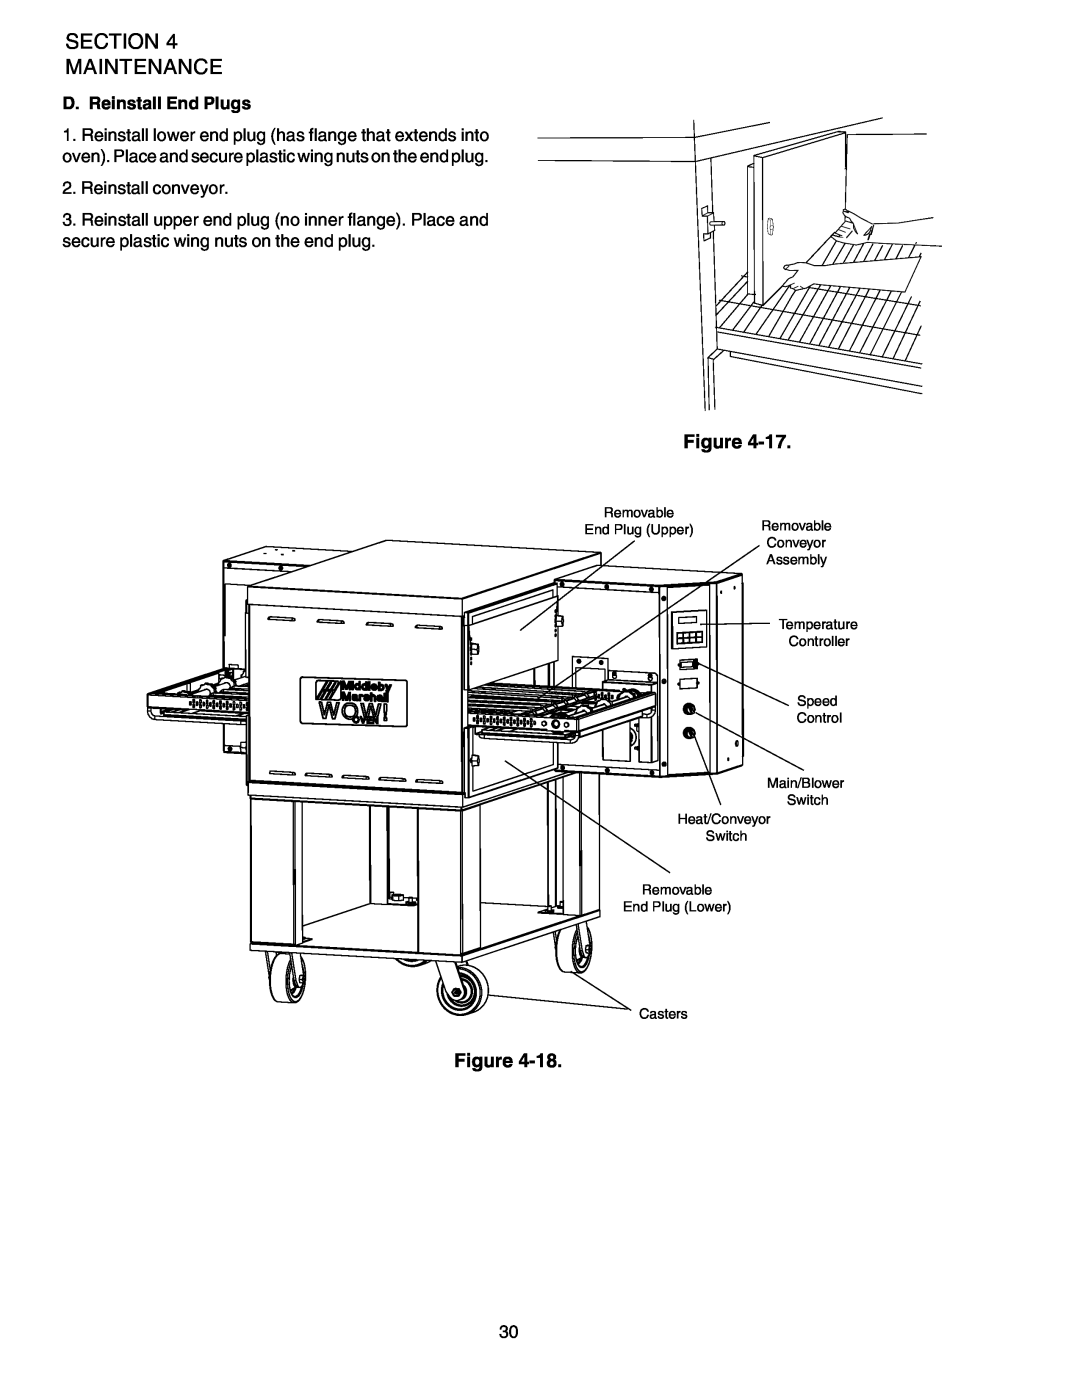 Middleby Marshall PS624E installation manual Section Maintenance, D. Reinstall End Plugs, Reinstall conveyor 